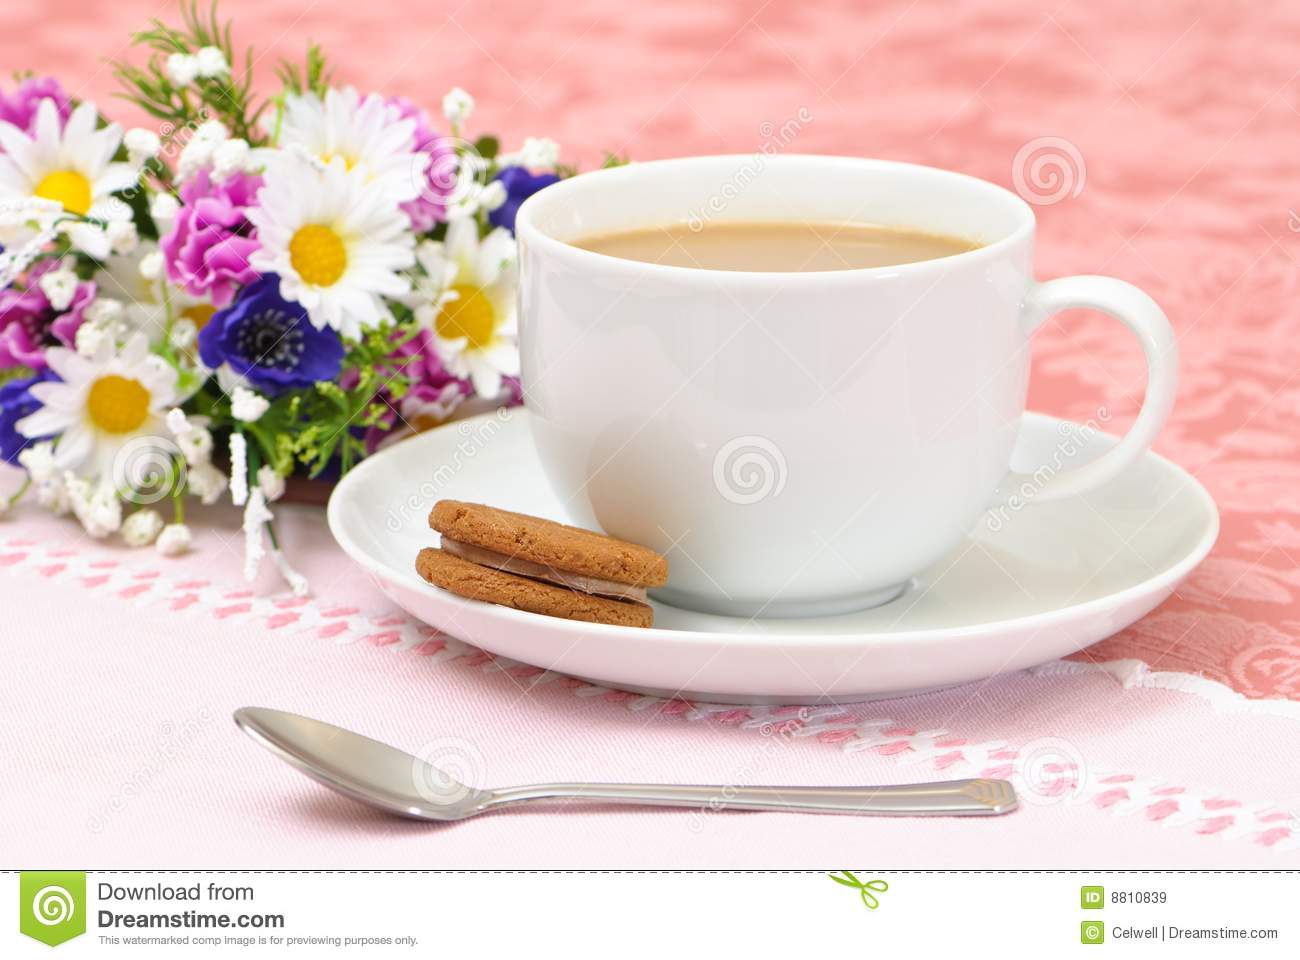 Afternoon Tea Royalty Free Stock Images   Image  8810839